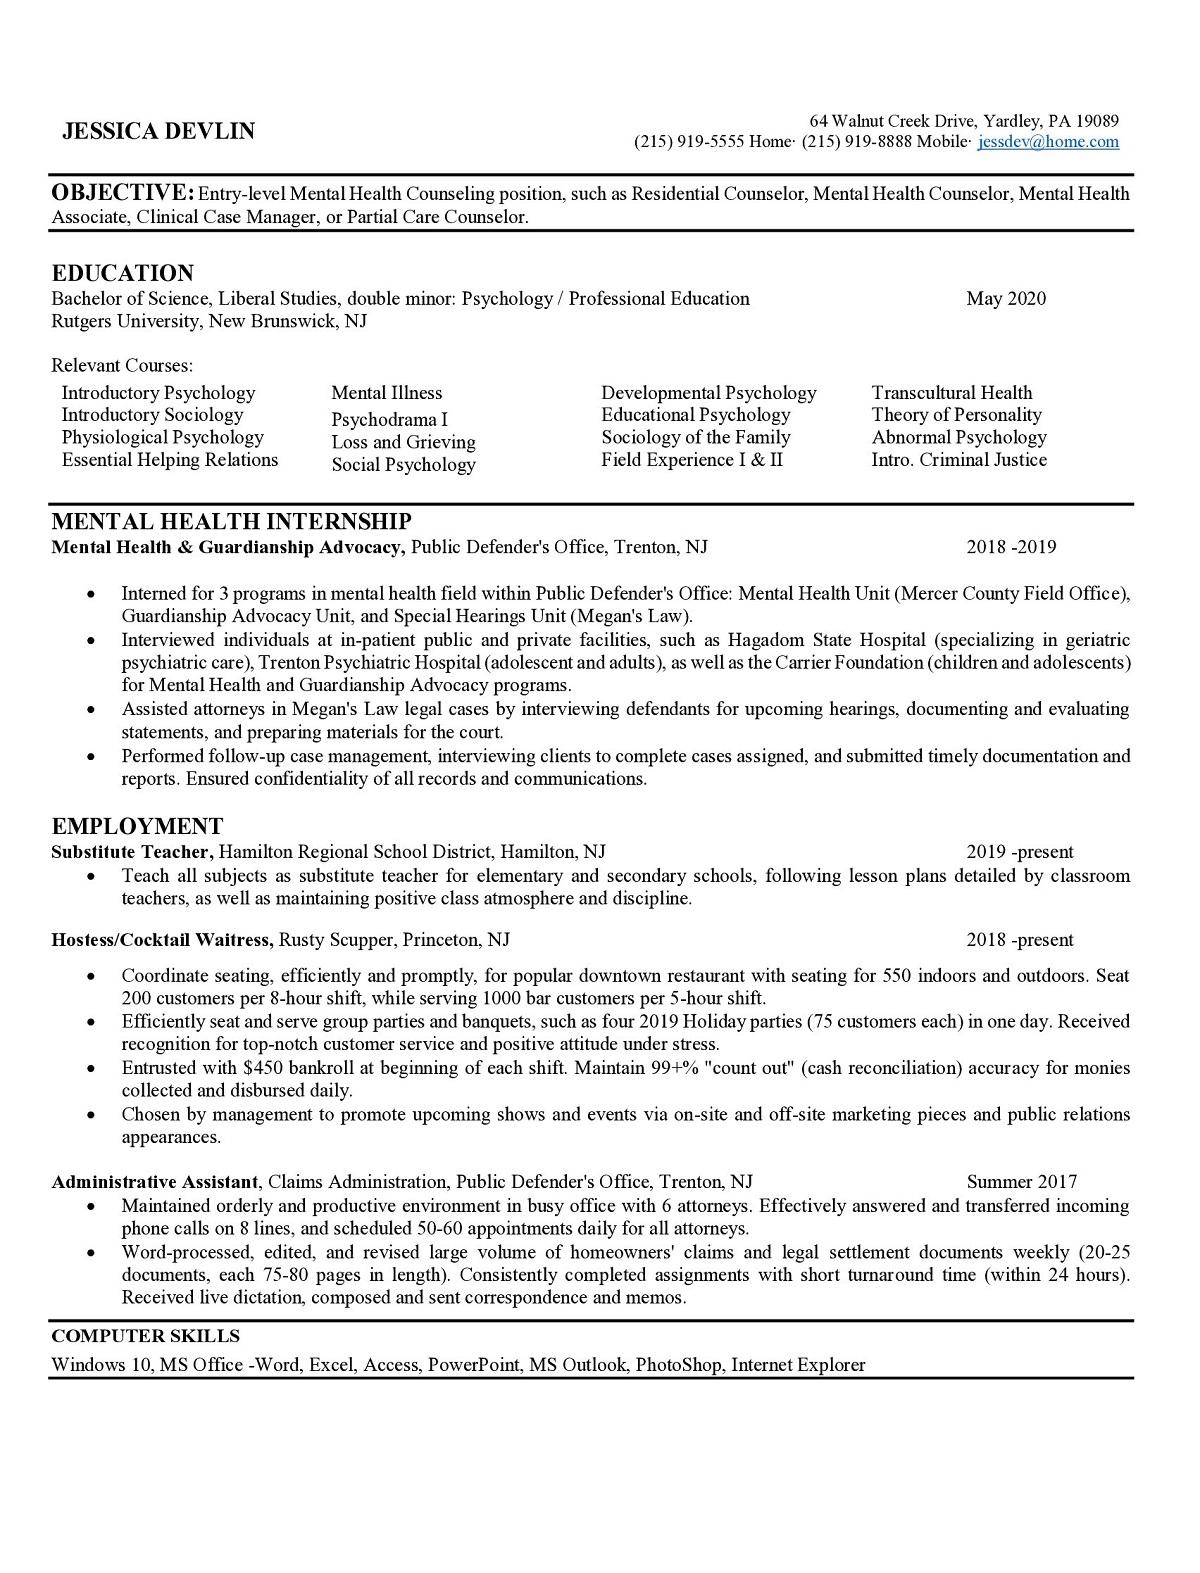 Sample resume: Health Counseling, Entry Level, Chronological